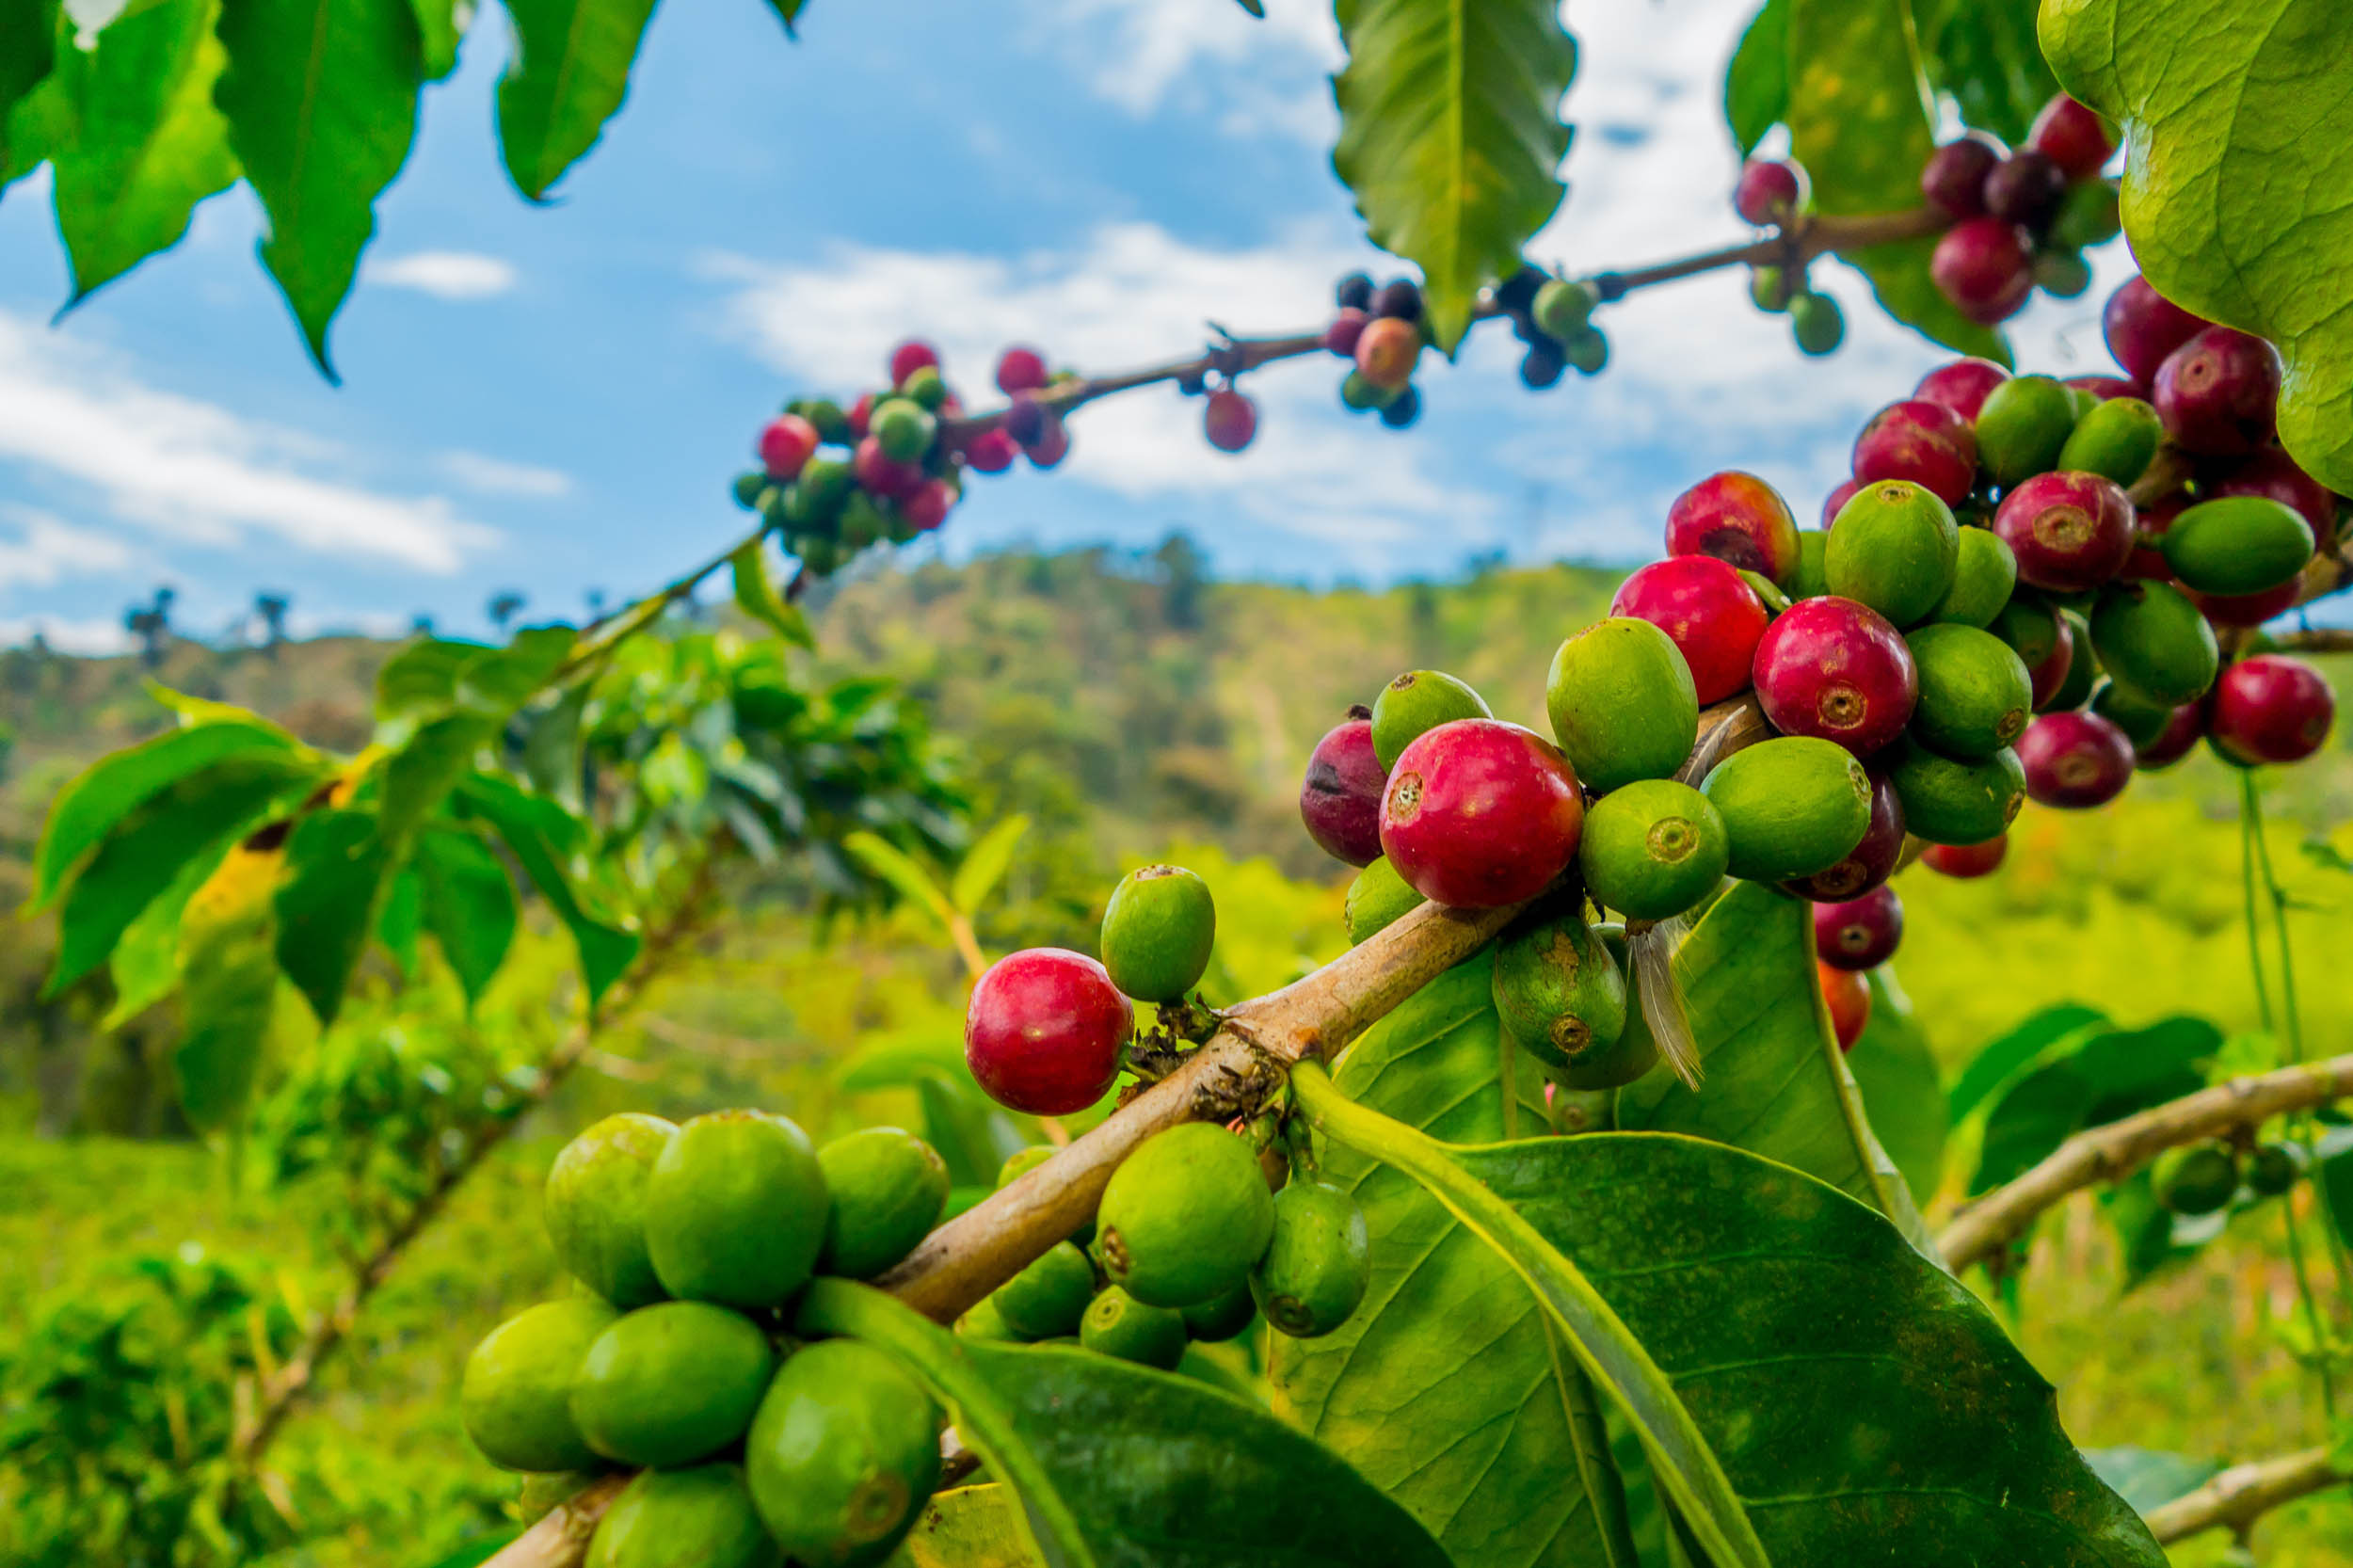 Coffee beans growing on a tree.